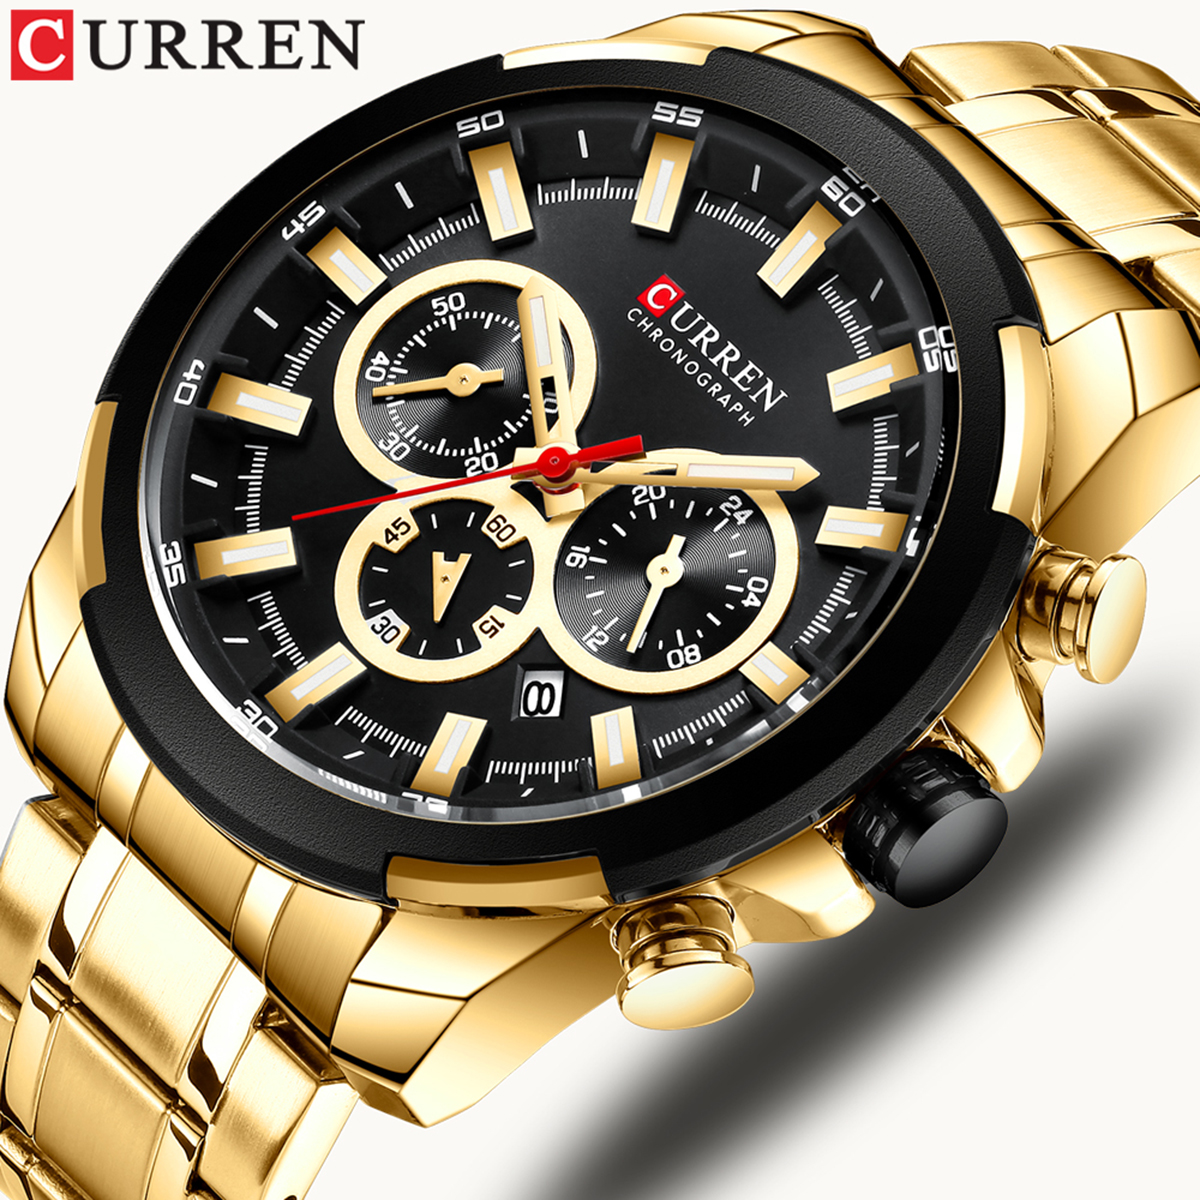 CURREN 8361 Quartz Man Wristwatch Watch for Male Men Watches with Calendar Indicator Date Waterproof Luminous Hands Three Sub-Dials Second Minute Microsecond Chronograph Stainless Steel Stra - image 4 of 7